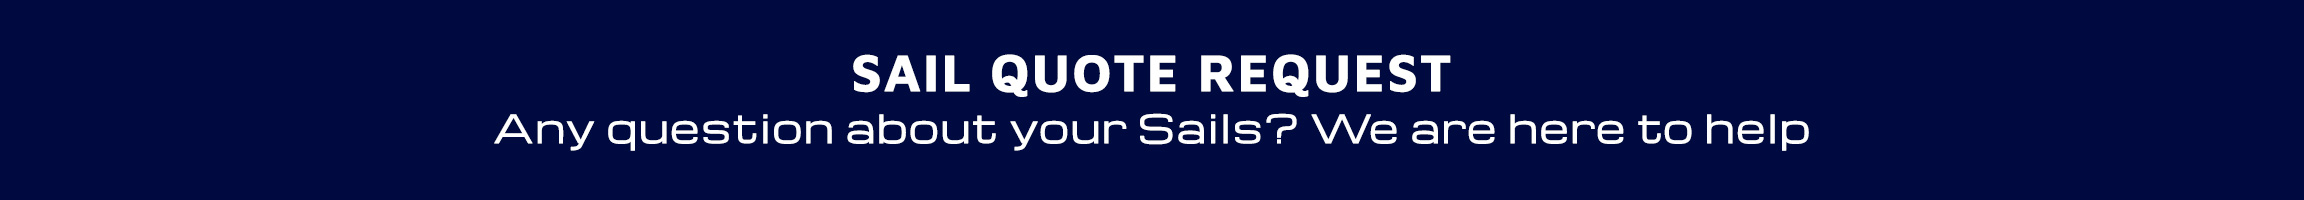 Sail quote request